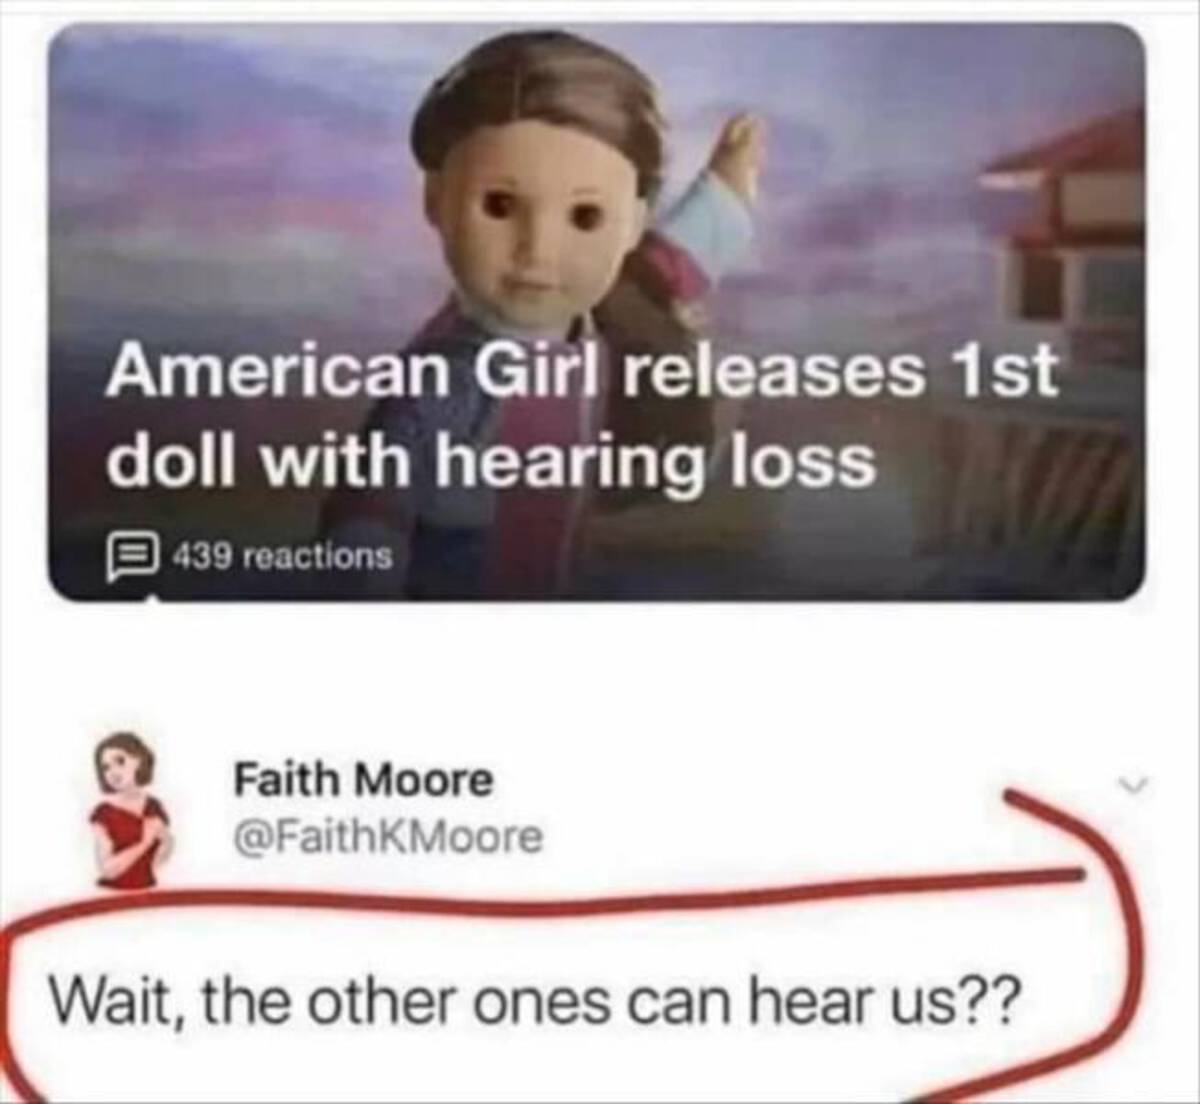 american girl doll hearing loss meme - American Girl releases 1st doll with hearing loss 439 reactions Faith Moore Wait, the other ones can hear us??